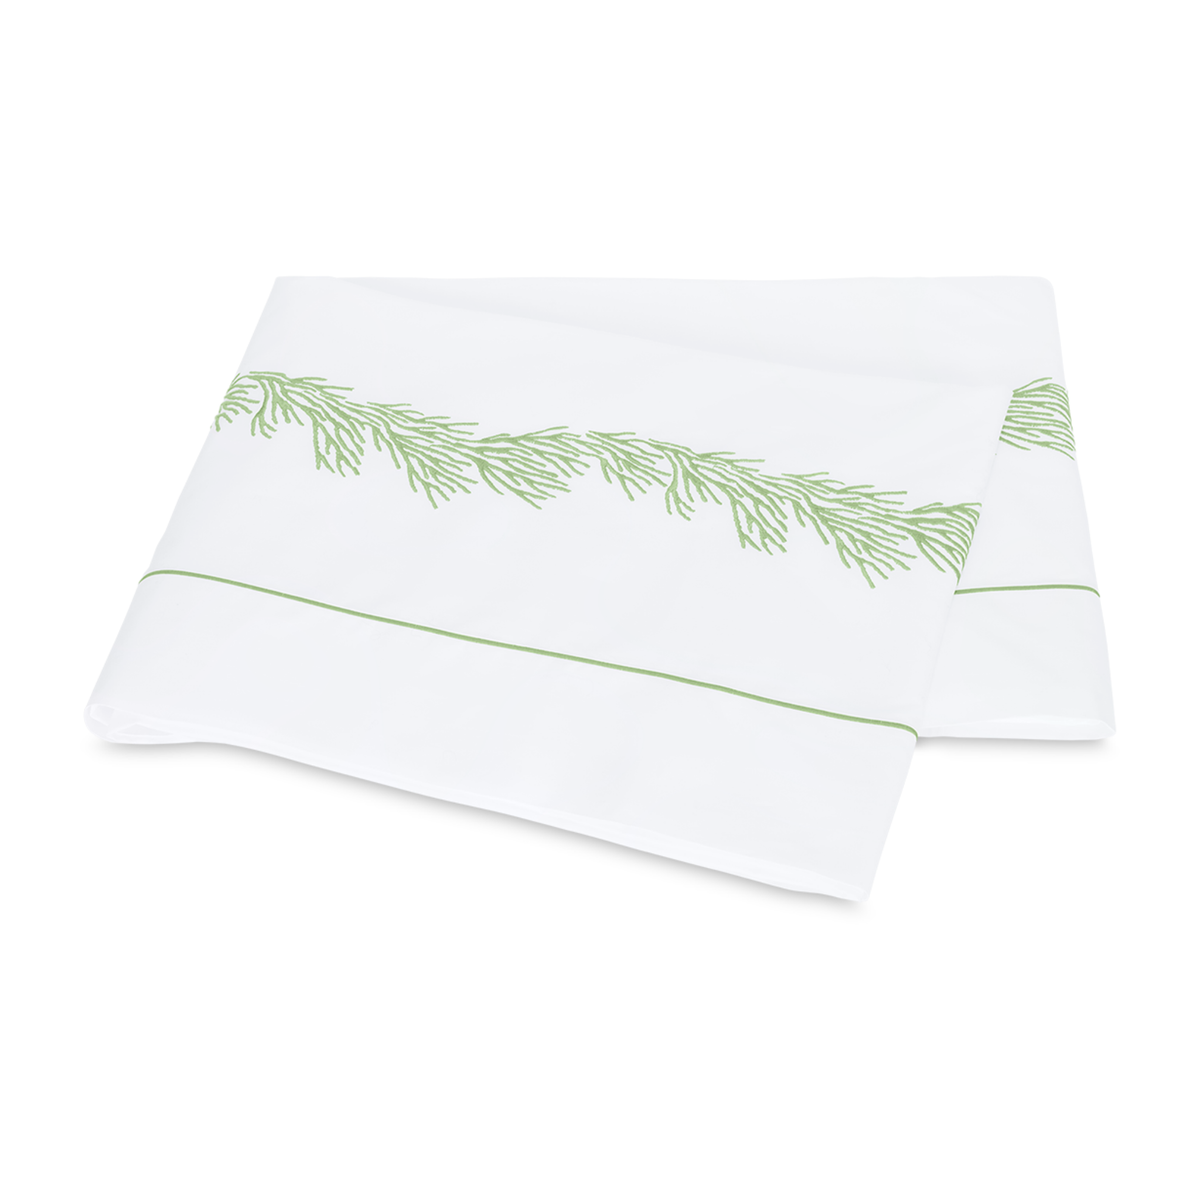 Folded Flat Sheet of Matouk Atoll Bedding Collection Grasshopper Color